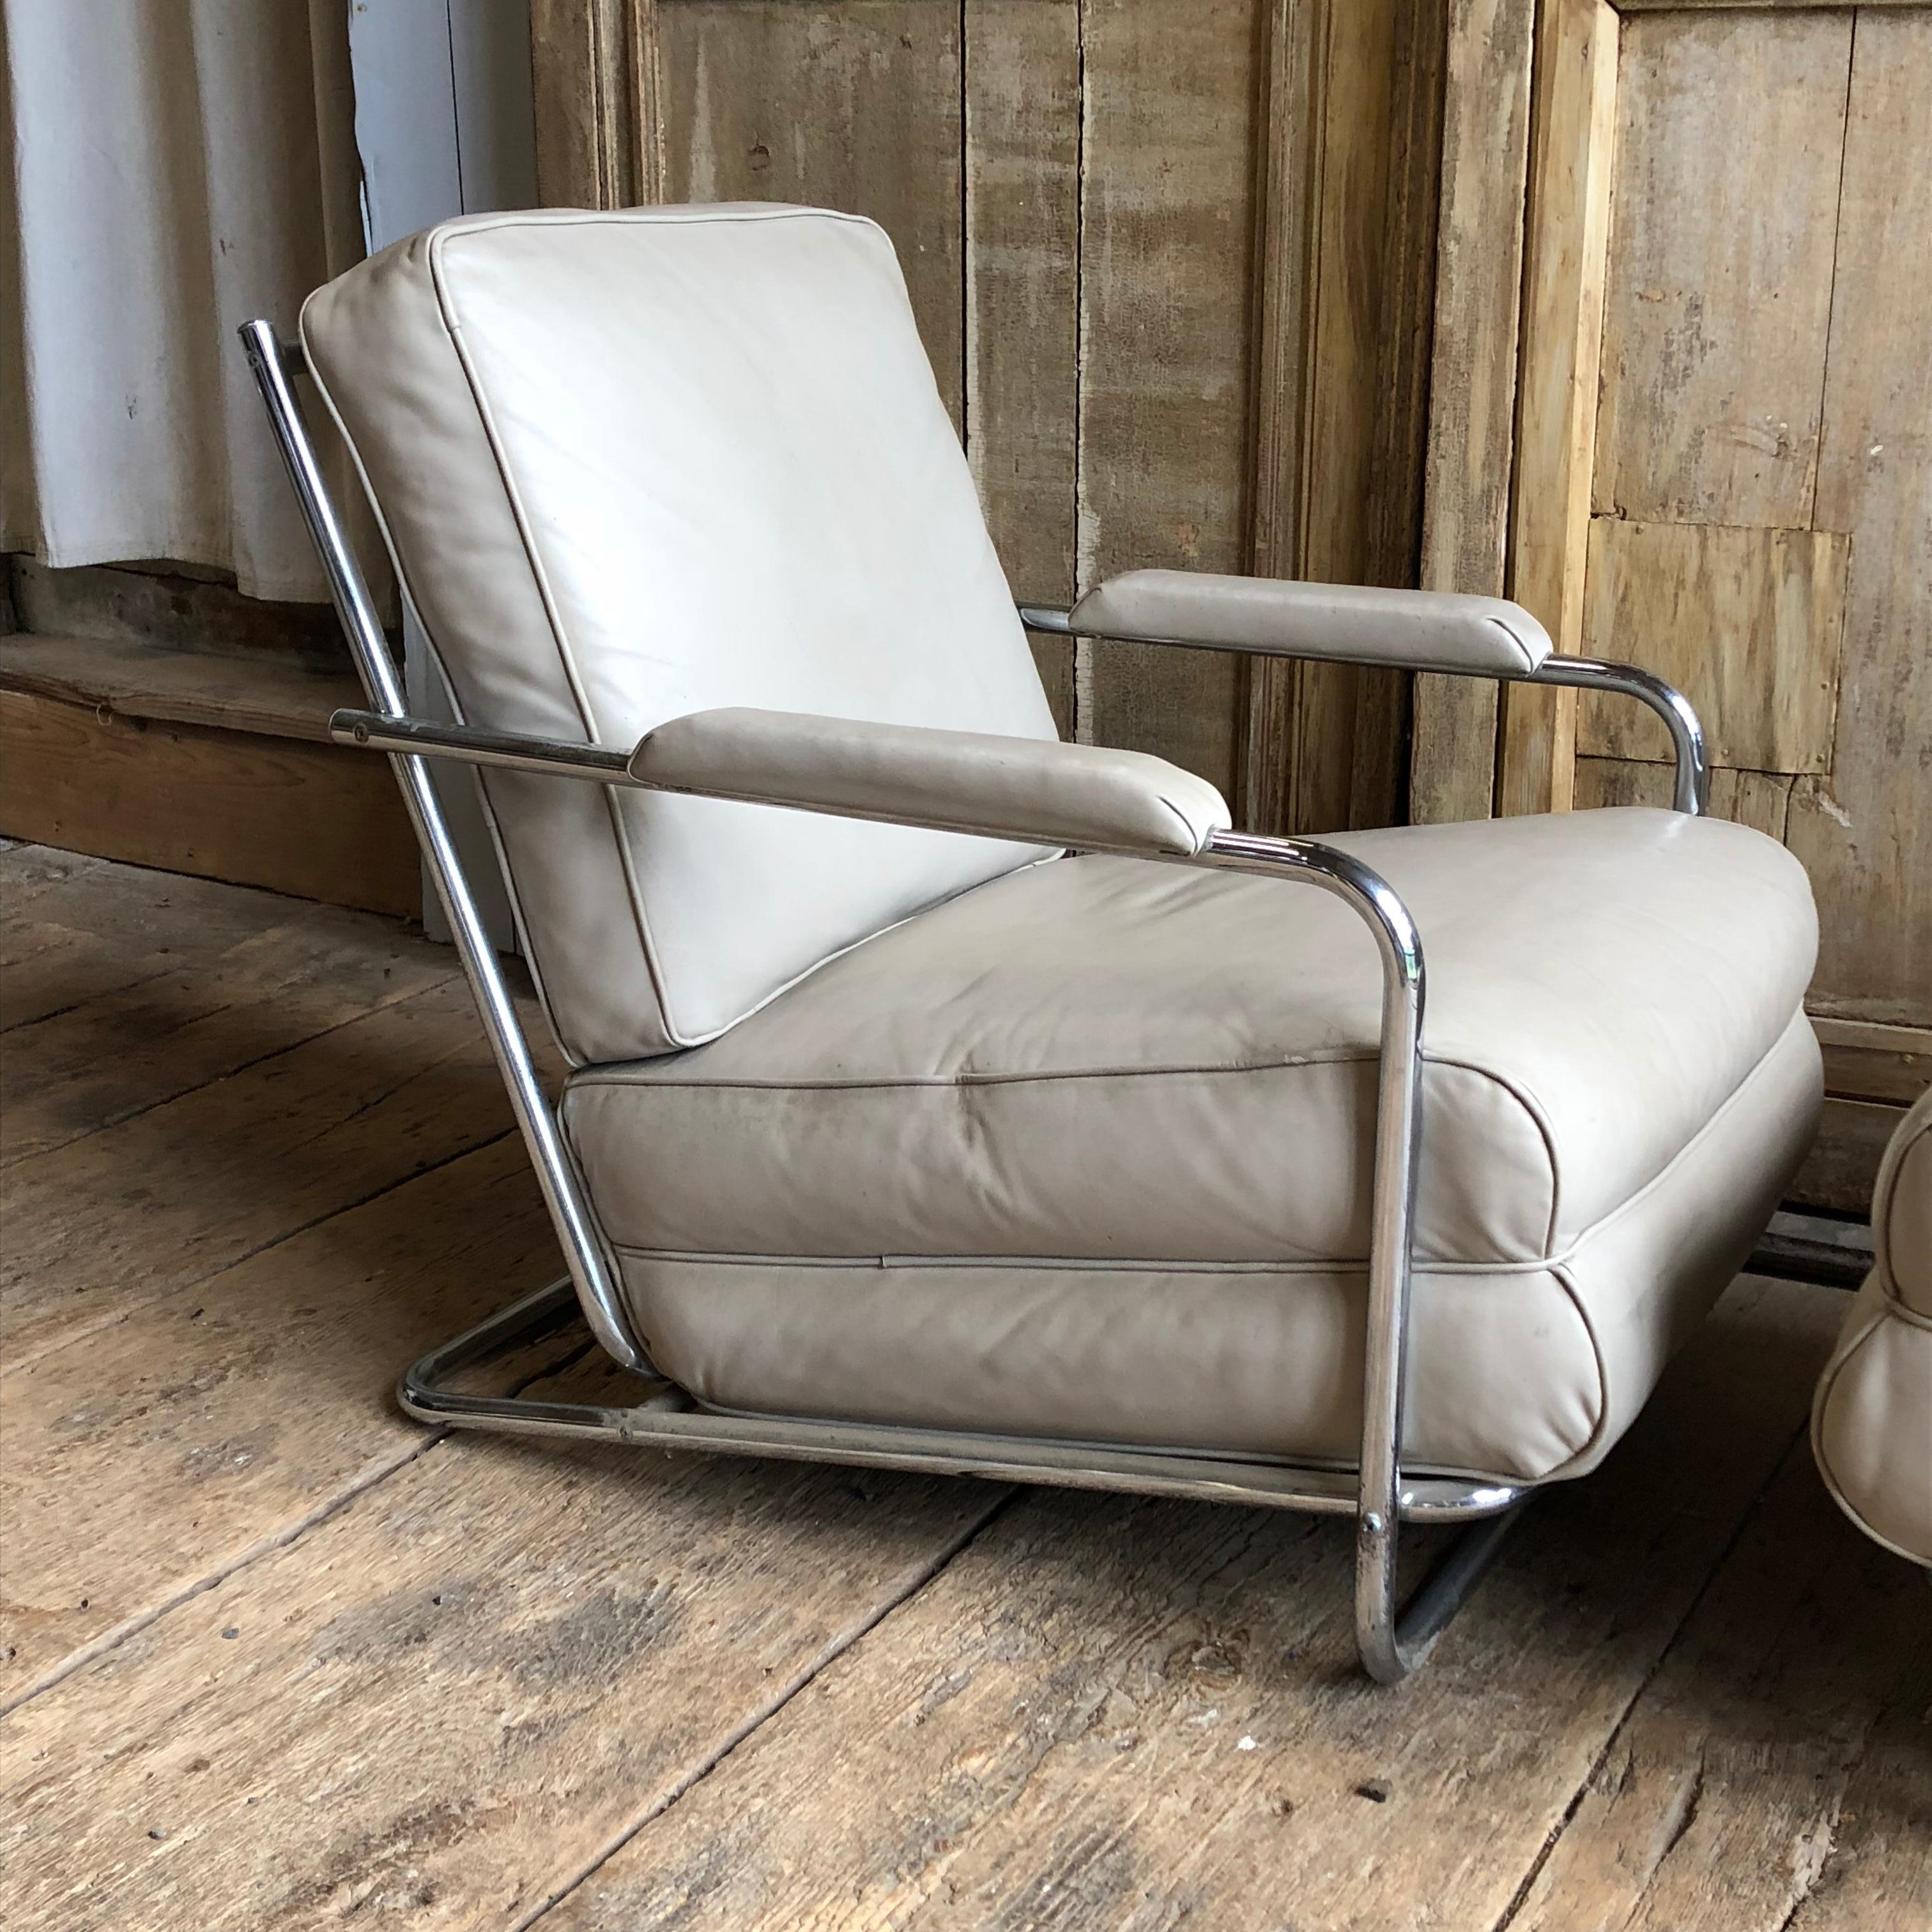 French Pair of Gilbert Rohde Lounge Chairs In Chrome and Leather